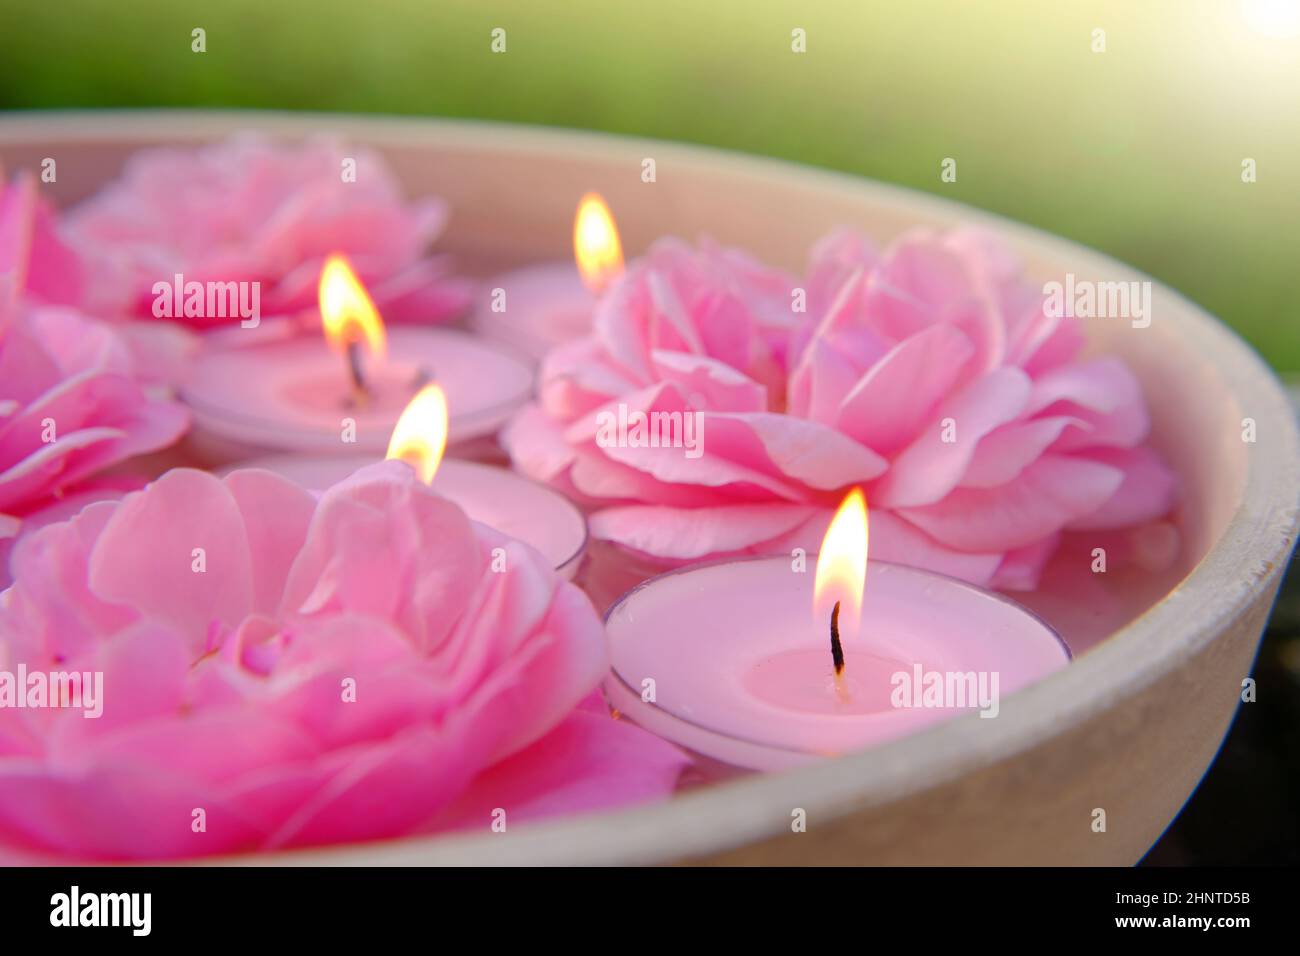 Closeup Shot of a Decorative Candle with Beads and Dried Flowers on a Tray  Stock Photo - Image of nature, crystal: 217749676